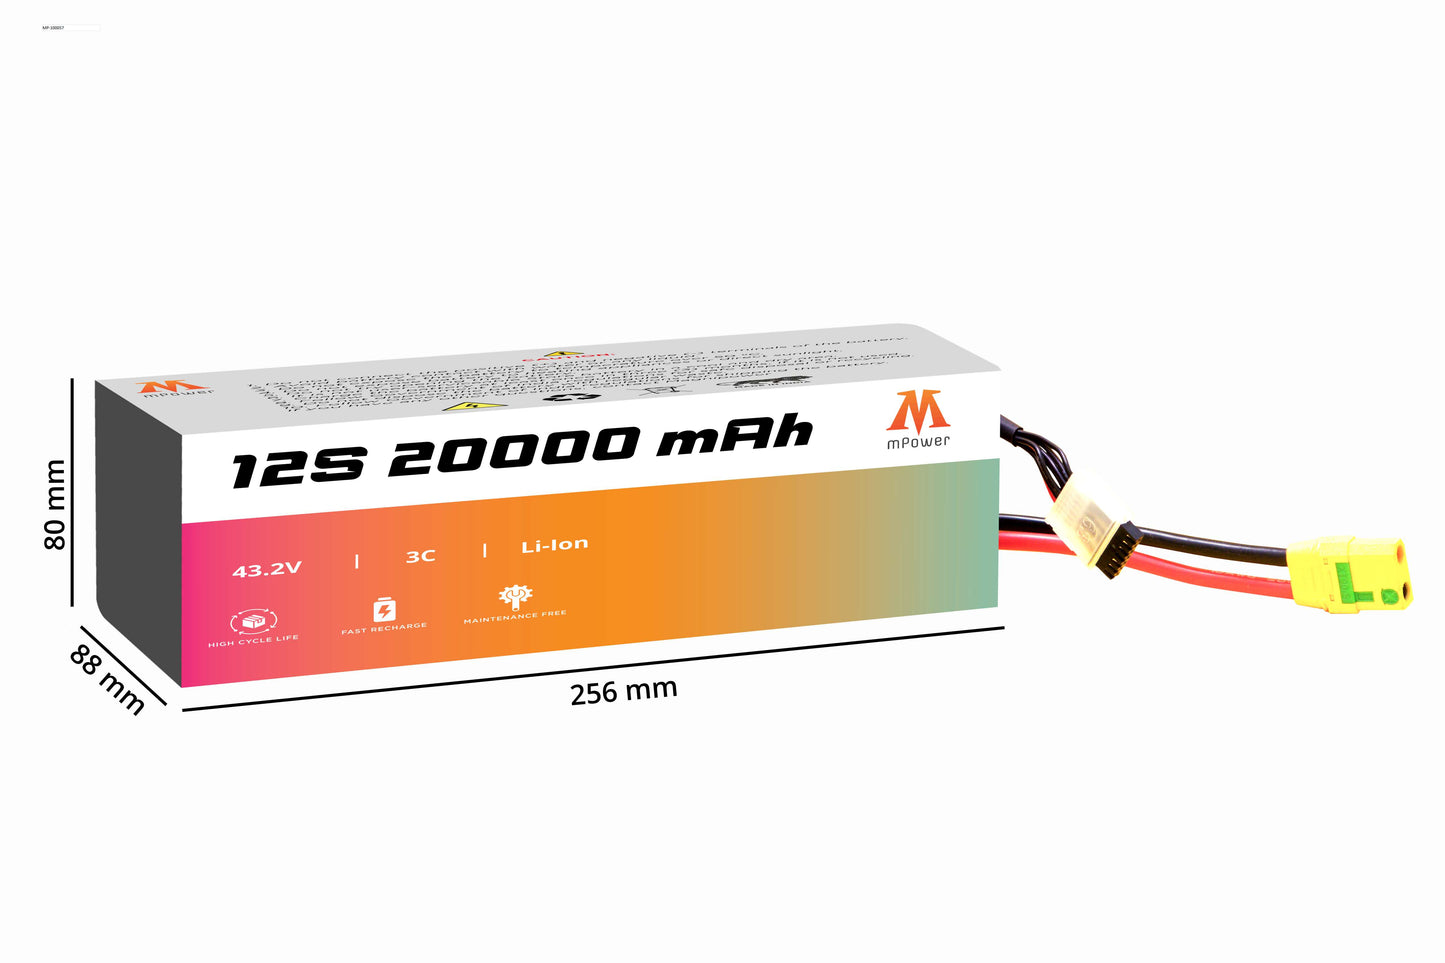 mPower 12S 20000mAh Lithium-Ion Battery for Survey Drones-mpowerlithium